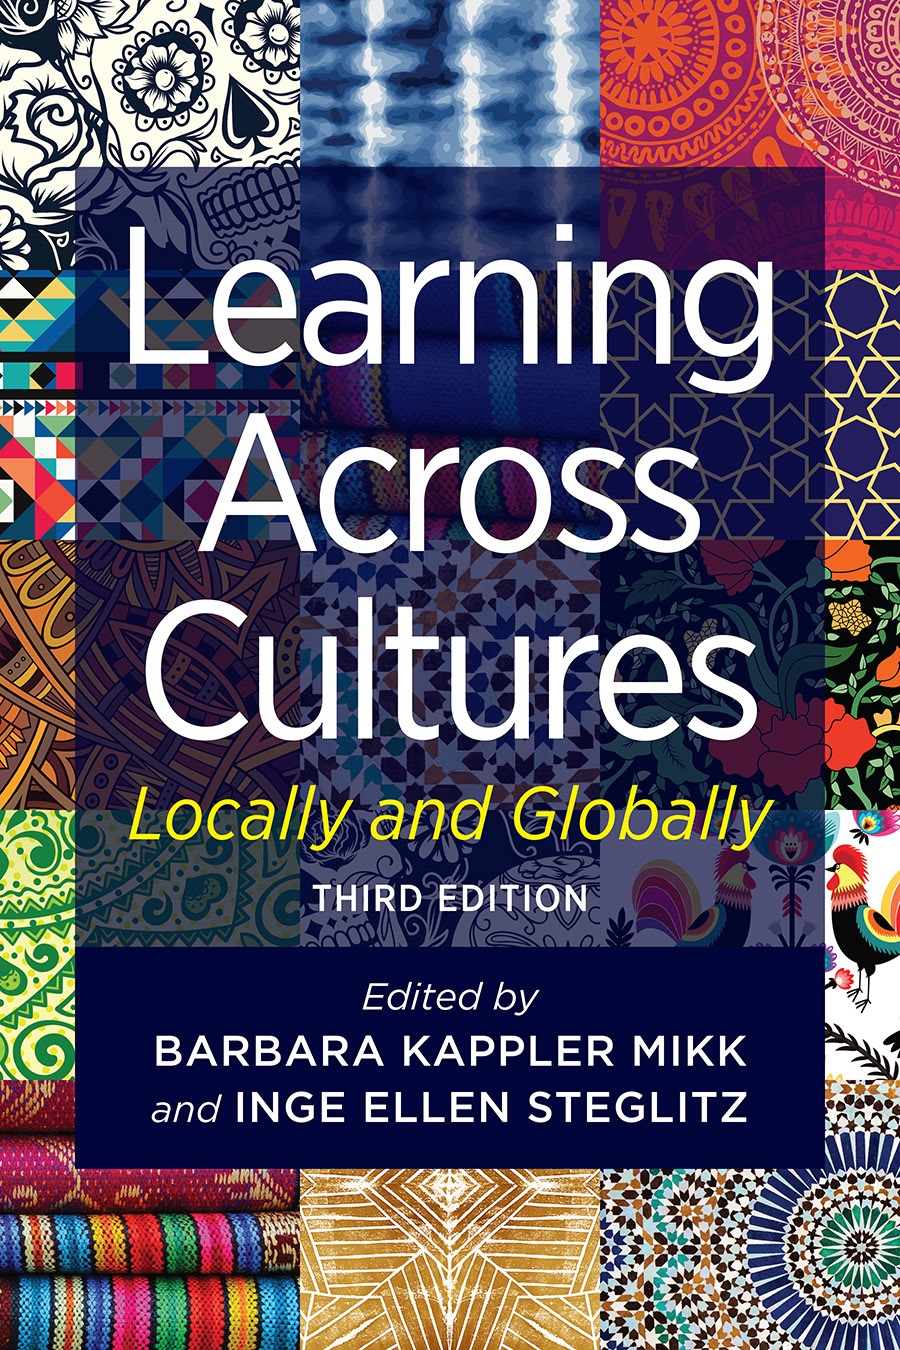 Cover of learning across cultures